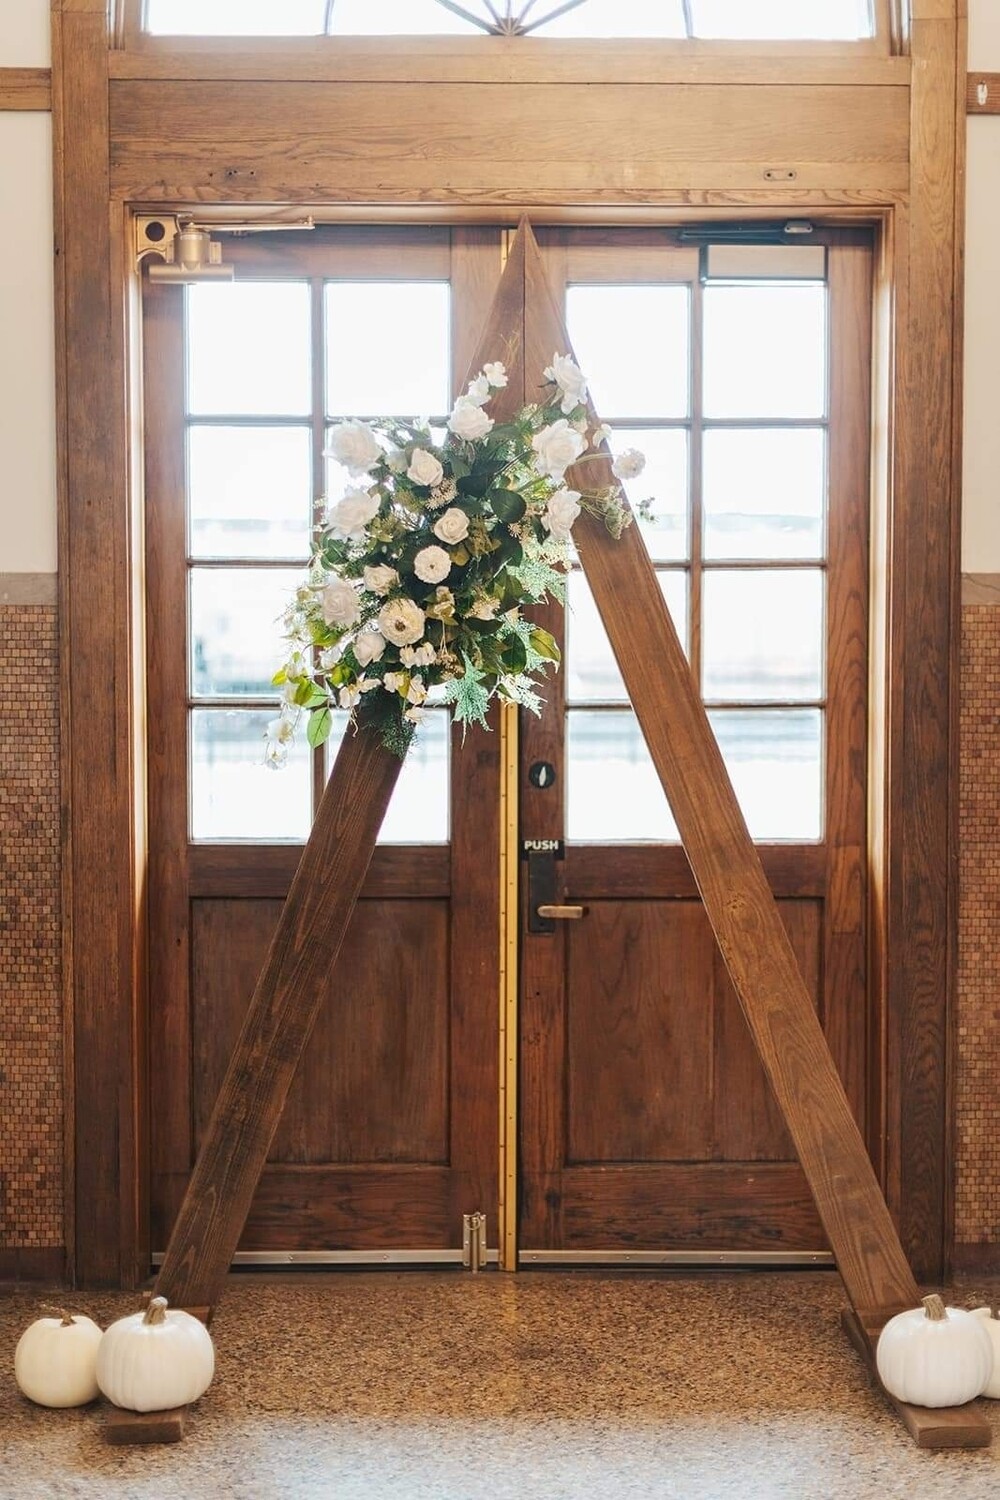 The "Dylan" Collection - Ceremony Arch Design, medium